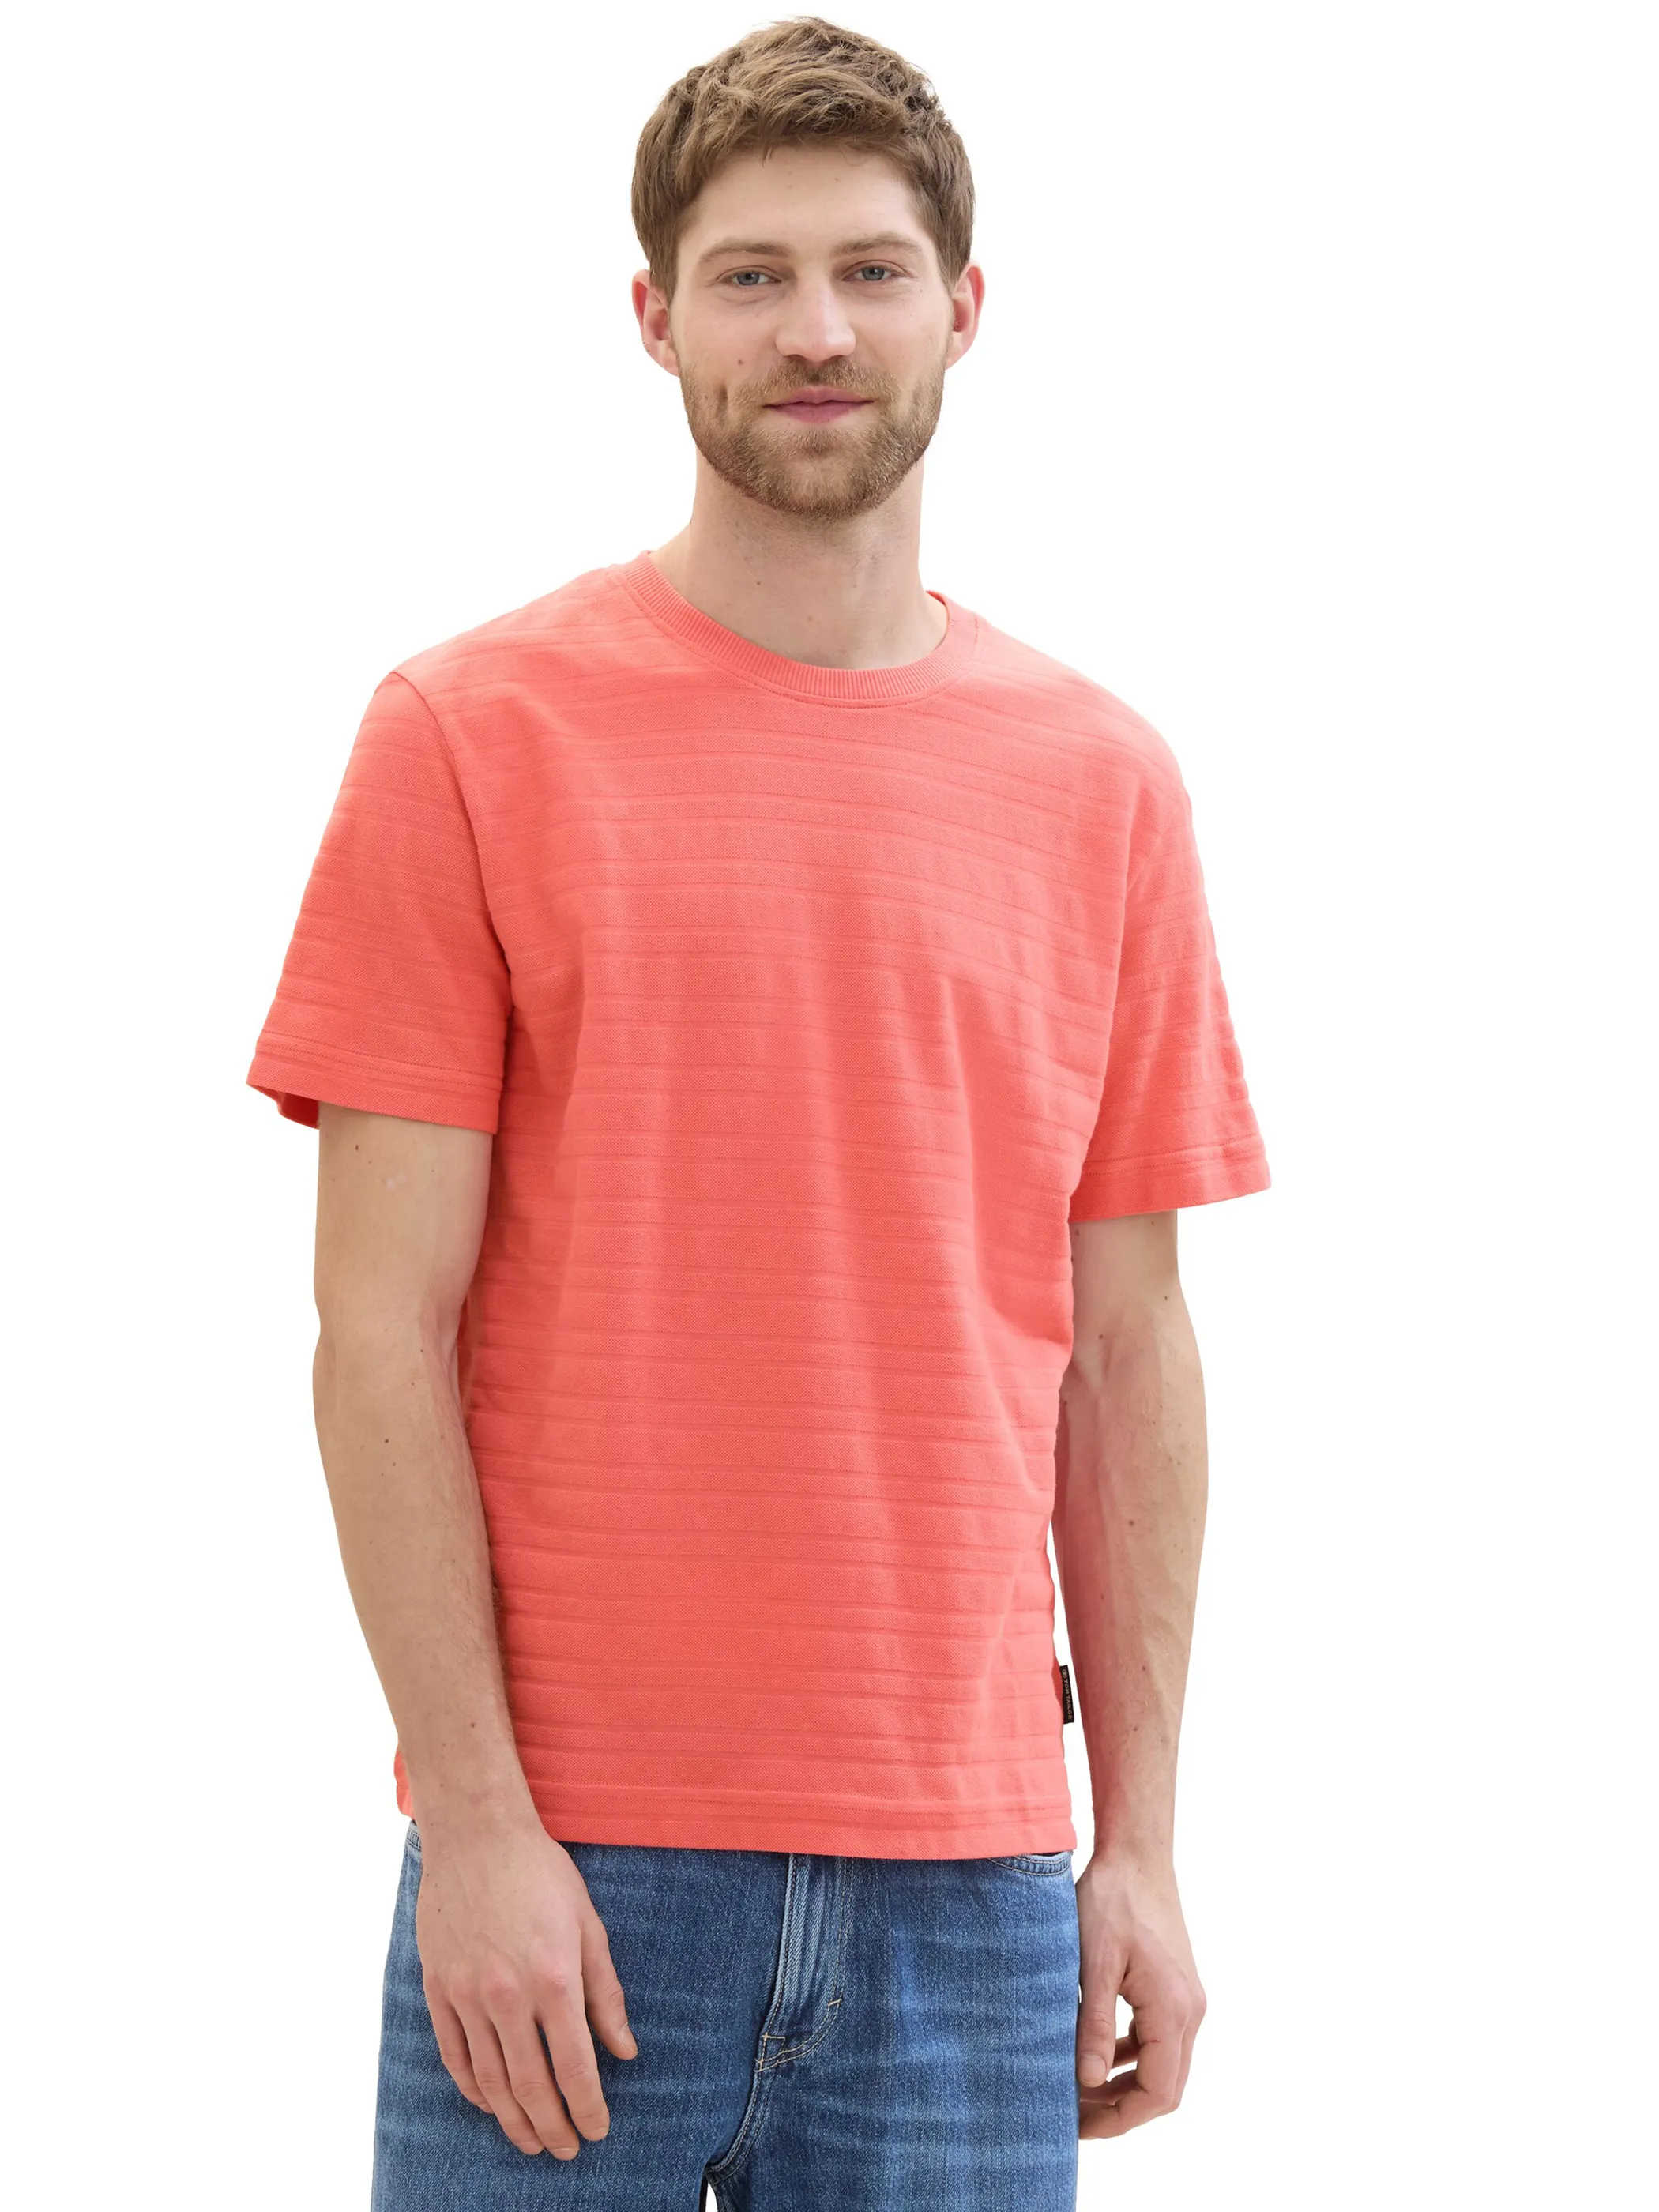 Tom Tailor 1042131 structured t-shirt Pink 895628 26202 5